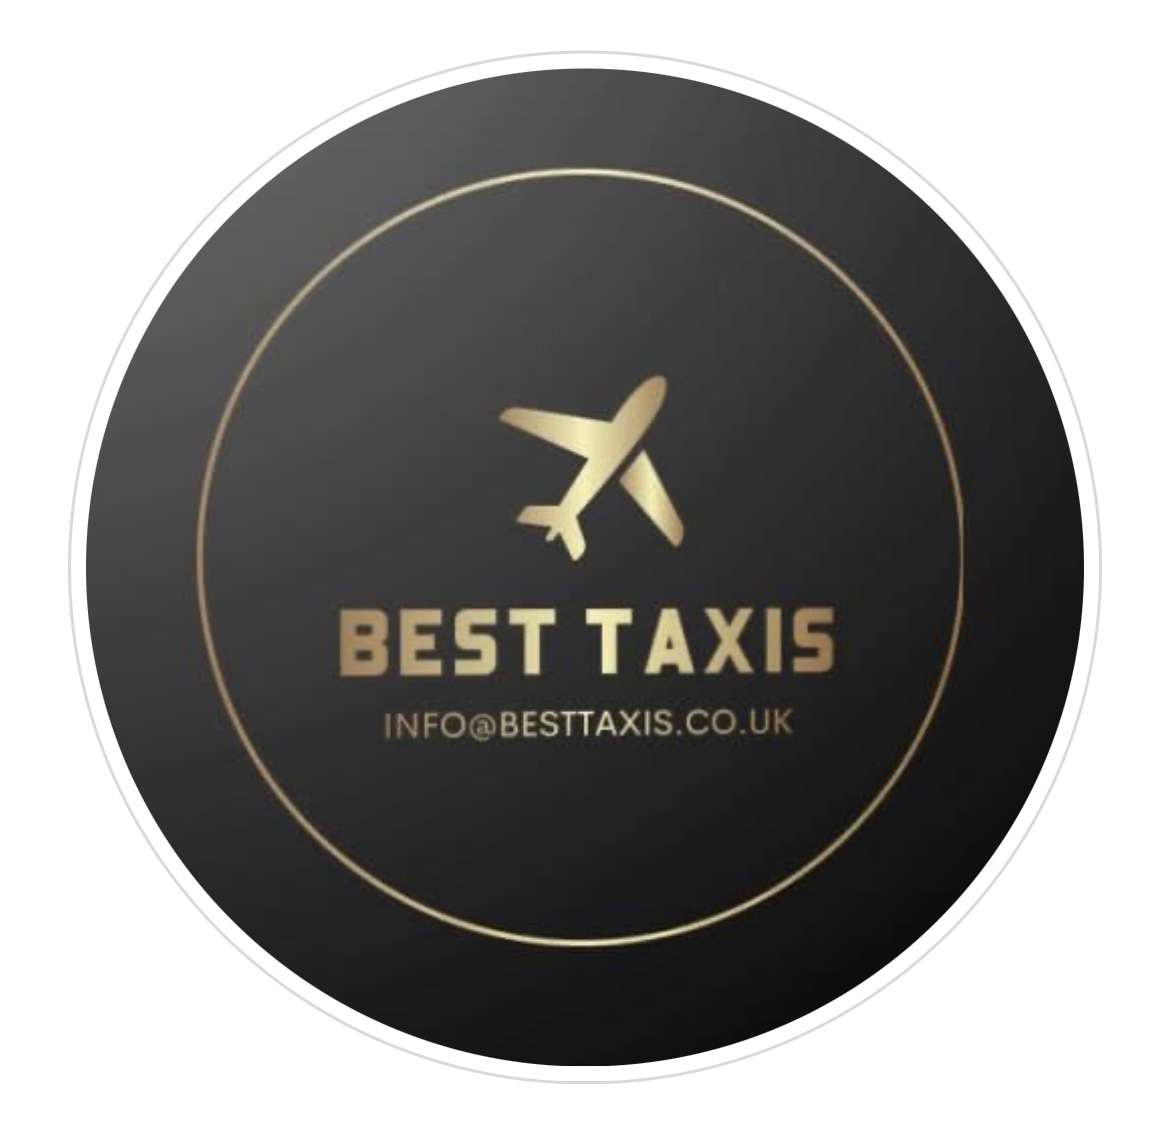 BEST TAXIS